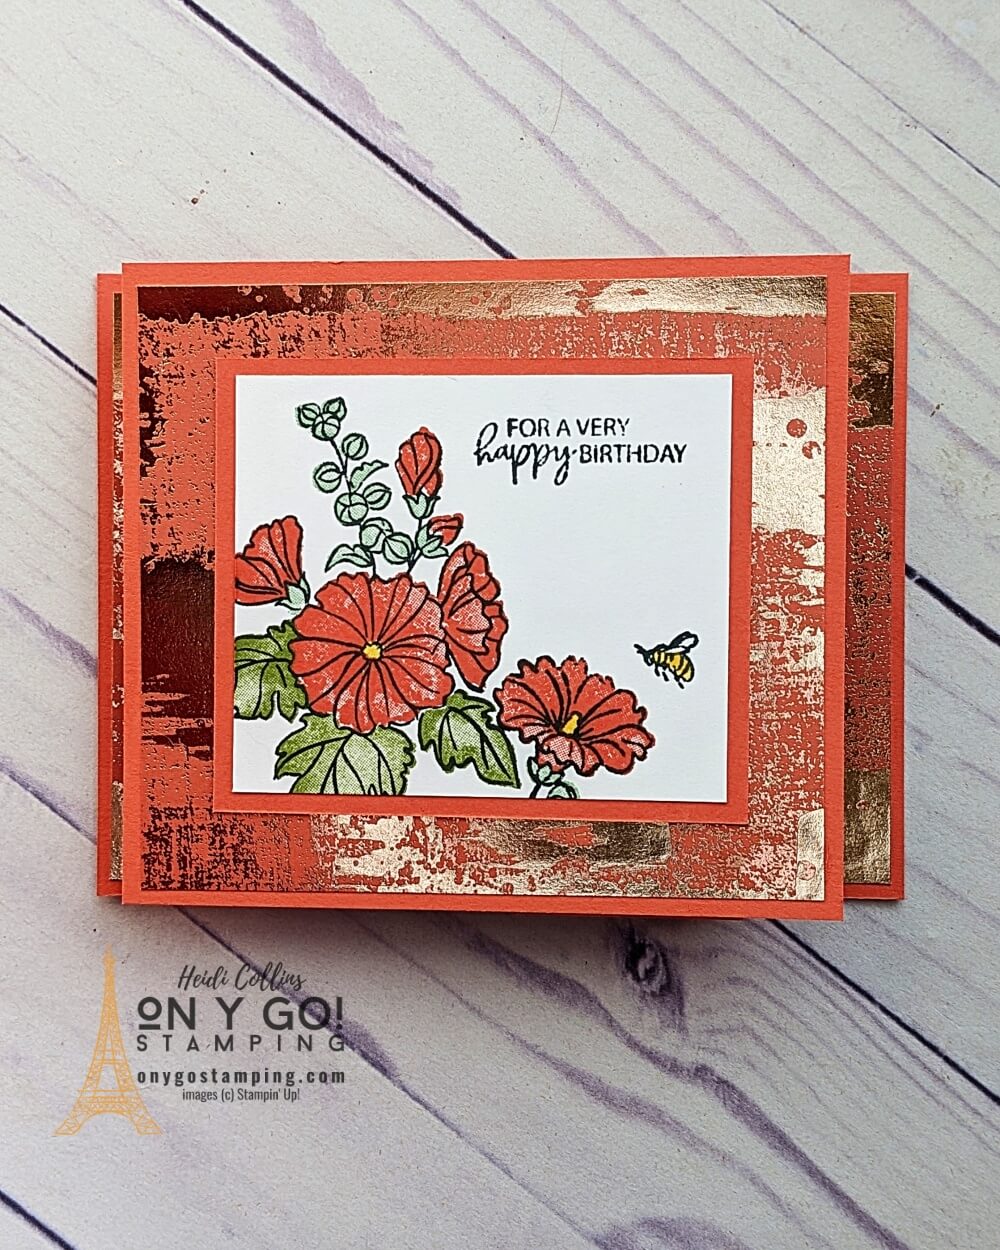 Sneak Peek of the NEW Beautifully Happy Stamp Set from Stampin' Up!®